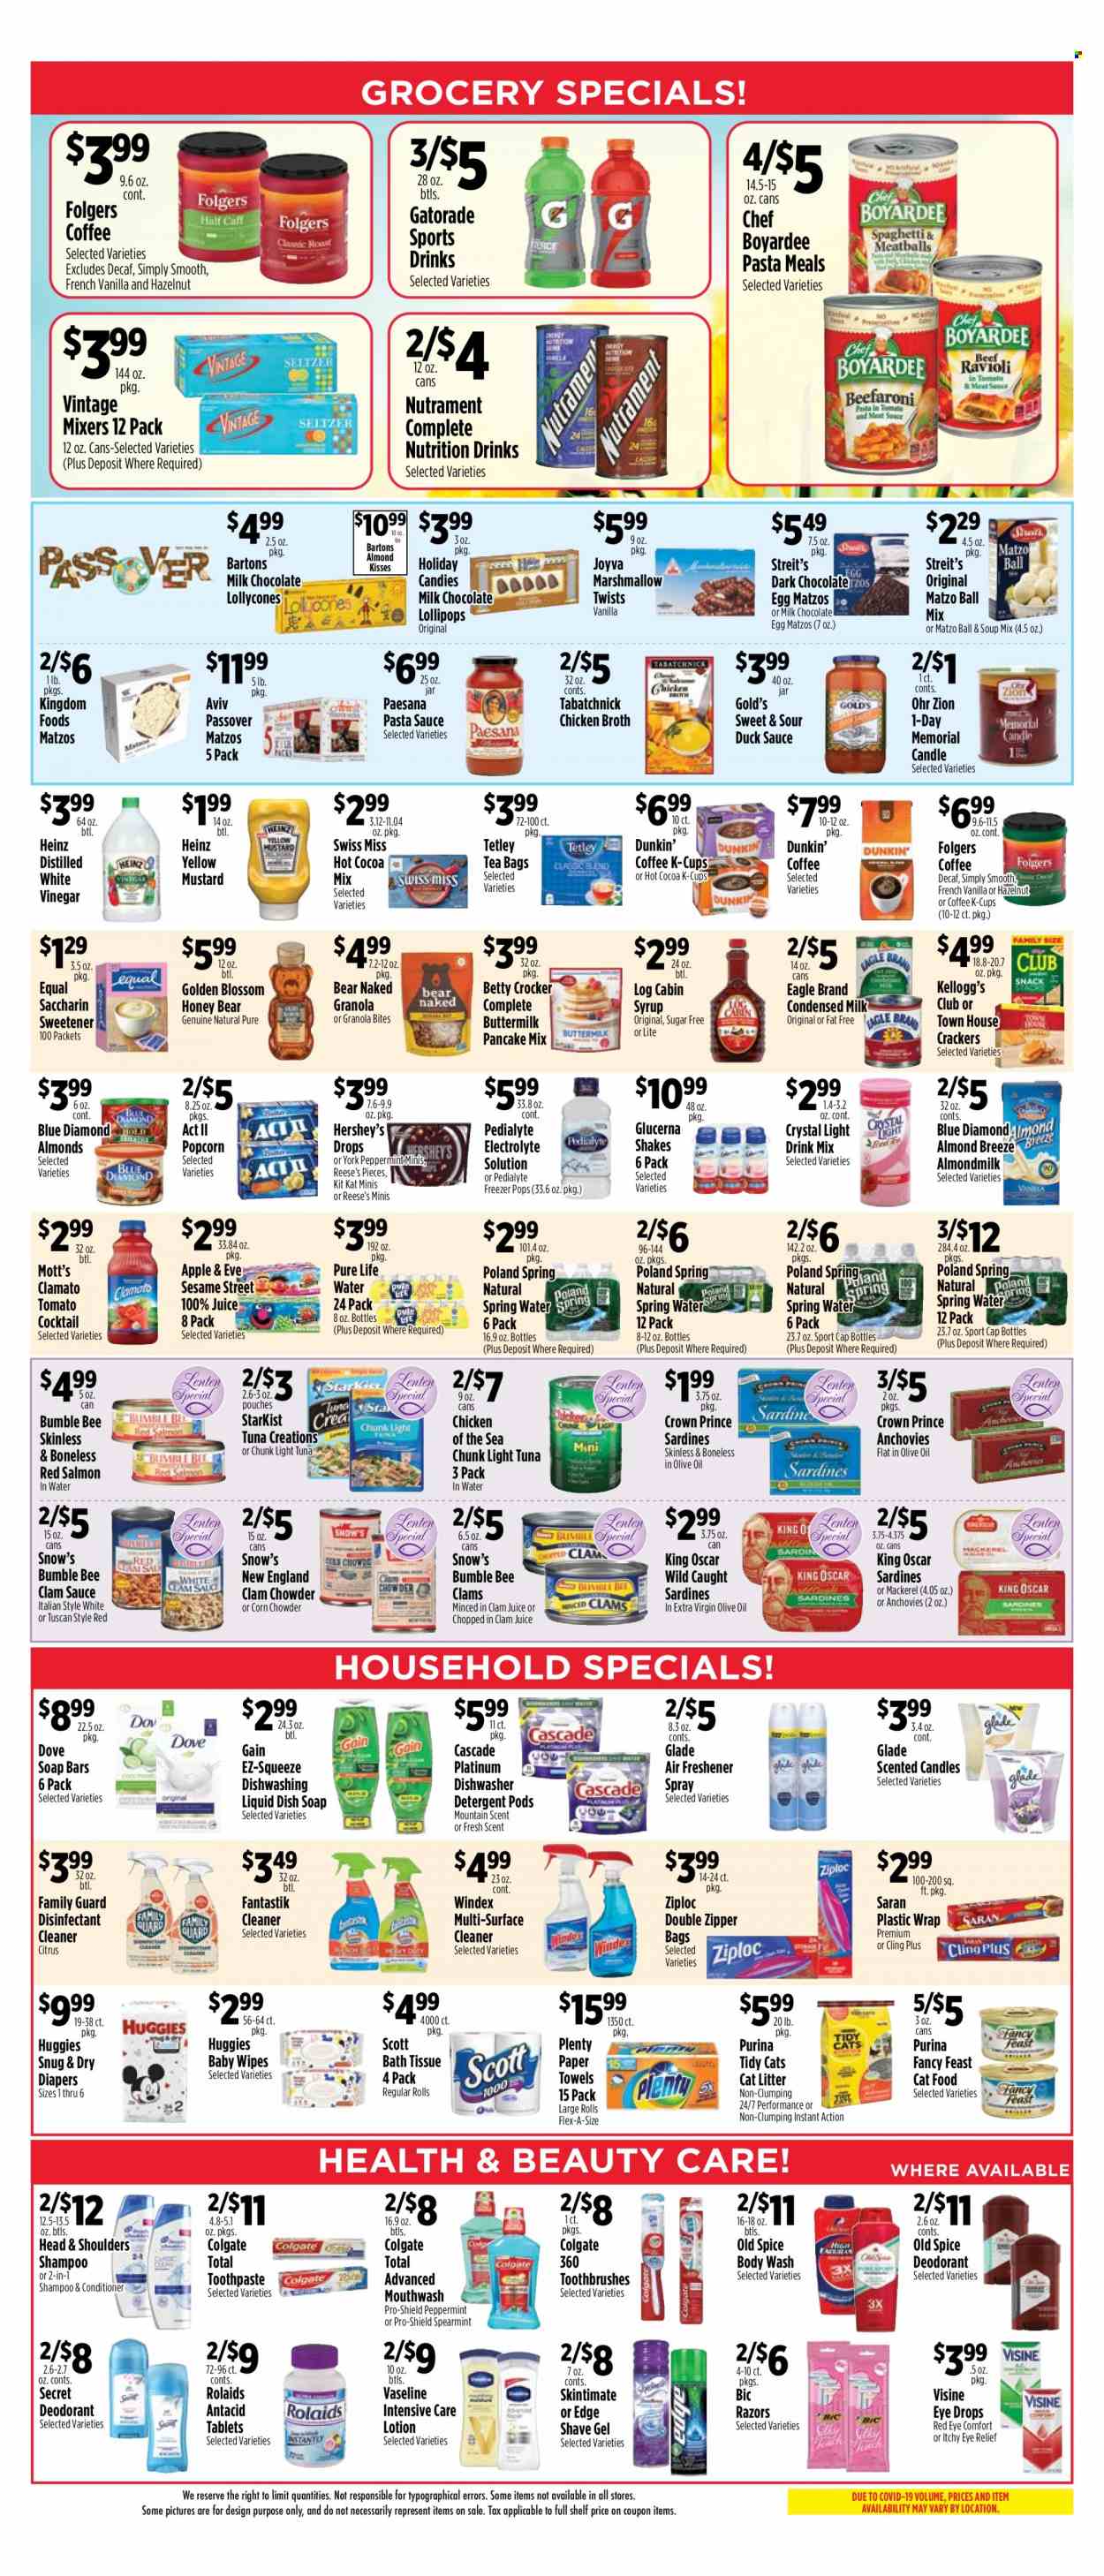 thumbnail - Pioneer Supermarkets Flyer - 03/26/2023 - 04/01/2023 - Sales products - corn, Mott's, mackerel, sardines, StarKist, pasta sauce, soup mix, soup, Bumble Bee, sauce, pancakes, Swiss Miss, almond milk, buttermilk, condensed milk, Almond Breeze, shake, Blossom, Reese's, Hershey's, Dove, marshmallows, milk chocolate, KitKat, crackers, lollipop, Kellogg's, dark chocolate, Sesame Street, popcorn, chicken broth, broth, sweetener, anchovies, tuna in water, Heinz, light tuna, Chicken of the Sea, clam chowder, Chef Boyardee, granola, spice, duck sauce, mustard, extra virgin olive oil, vinegar, honey, syrup, Blue Diamond, juice, Clamato, Gatorade, Pedialyte, spring water, Pure Life Water, water, hot cocoa, tea bags, coffee, Folgers, coffee capsules, K-Cups, wipes, Huggies, baby wipes, nappies, bath tissue, Scott, Plenty, kitchen towels, paper towels, detergent, Gain, Windex, surface cleaner, cleaner, desinfection, Cascade, dishwashing liquid, body wash, shampoo, Old Spice, Vaseline, soap, Colgate, toothpaste, mouthwash, conditioner, Head & Shoulders, body lotion, BIC, shave gel. Page 3.